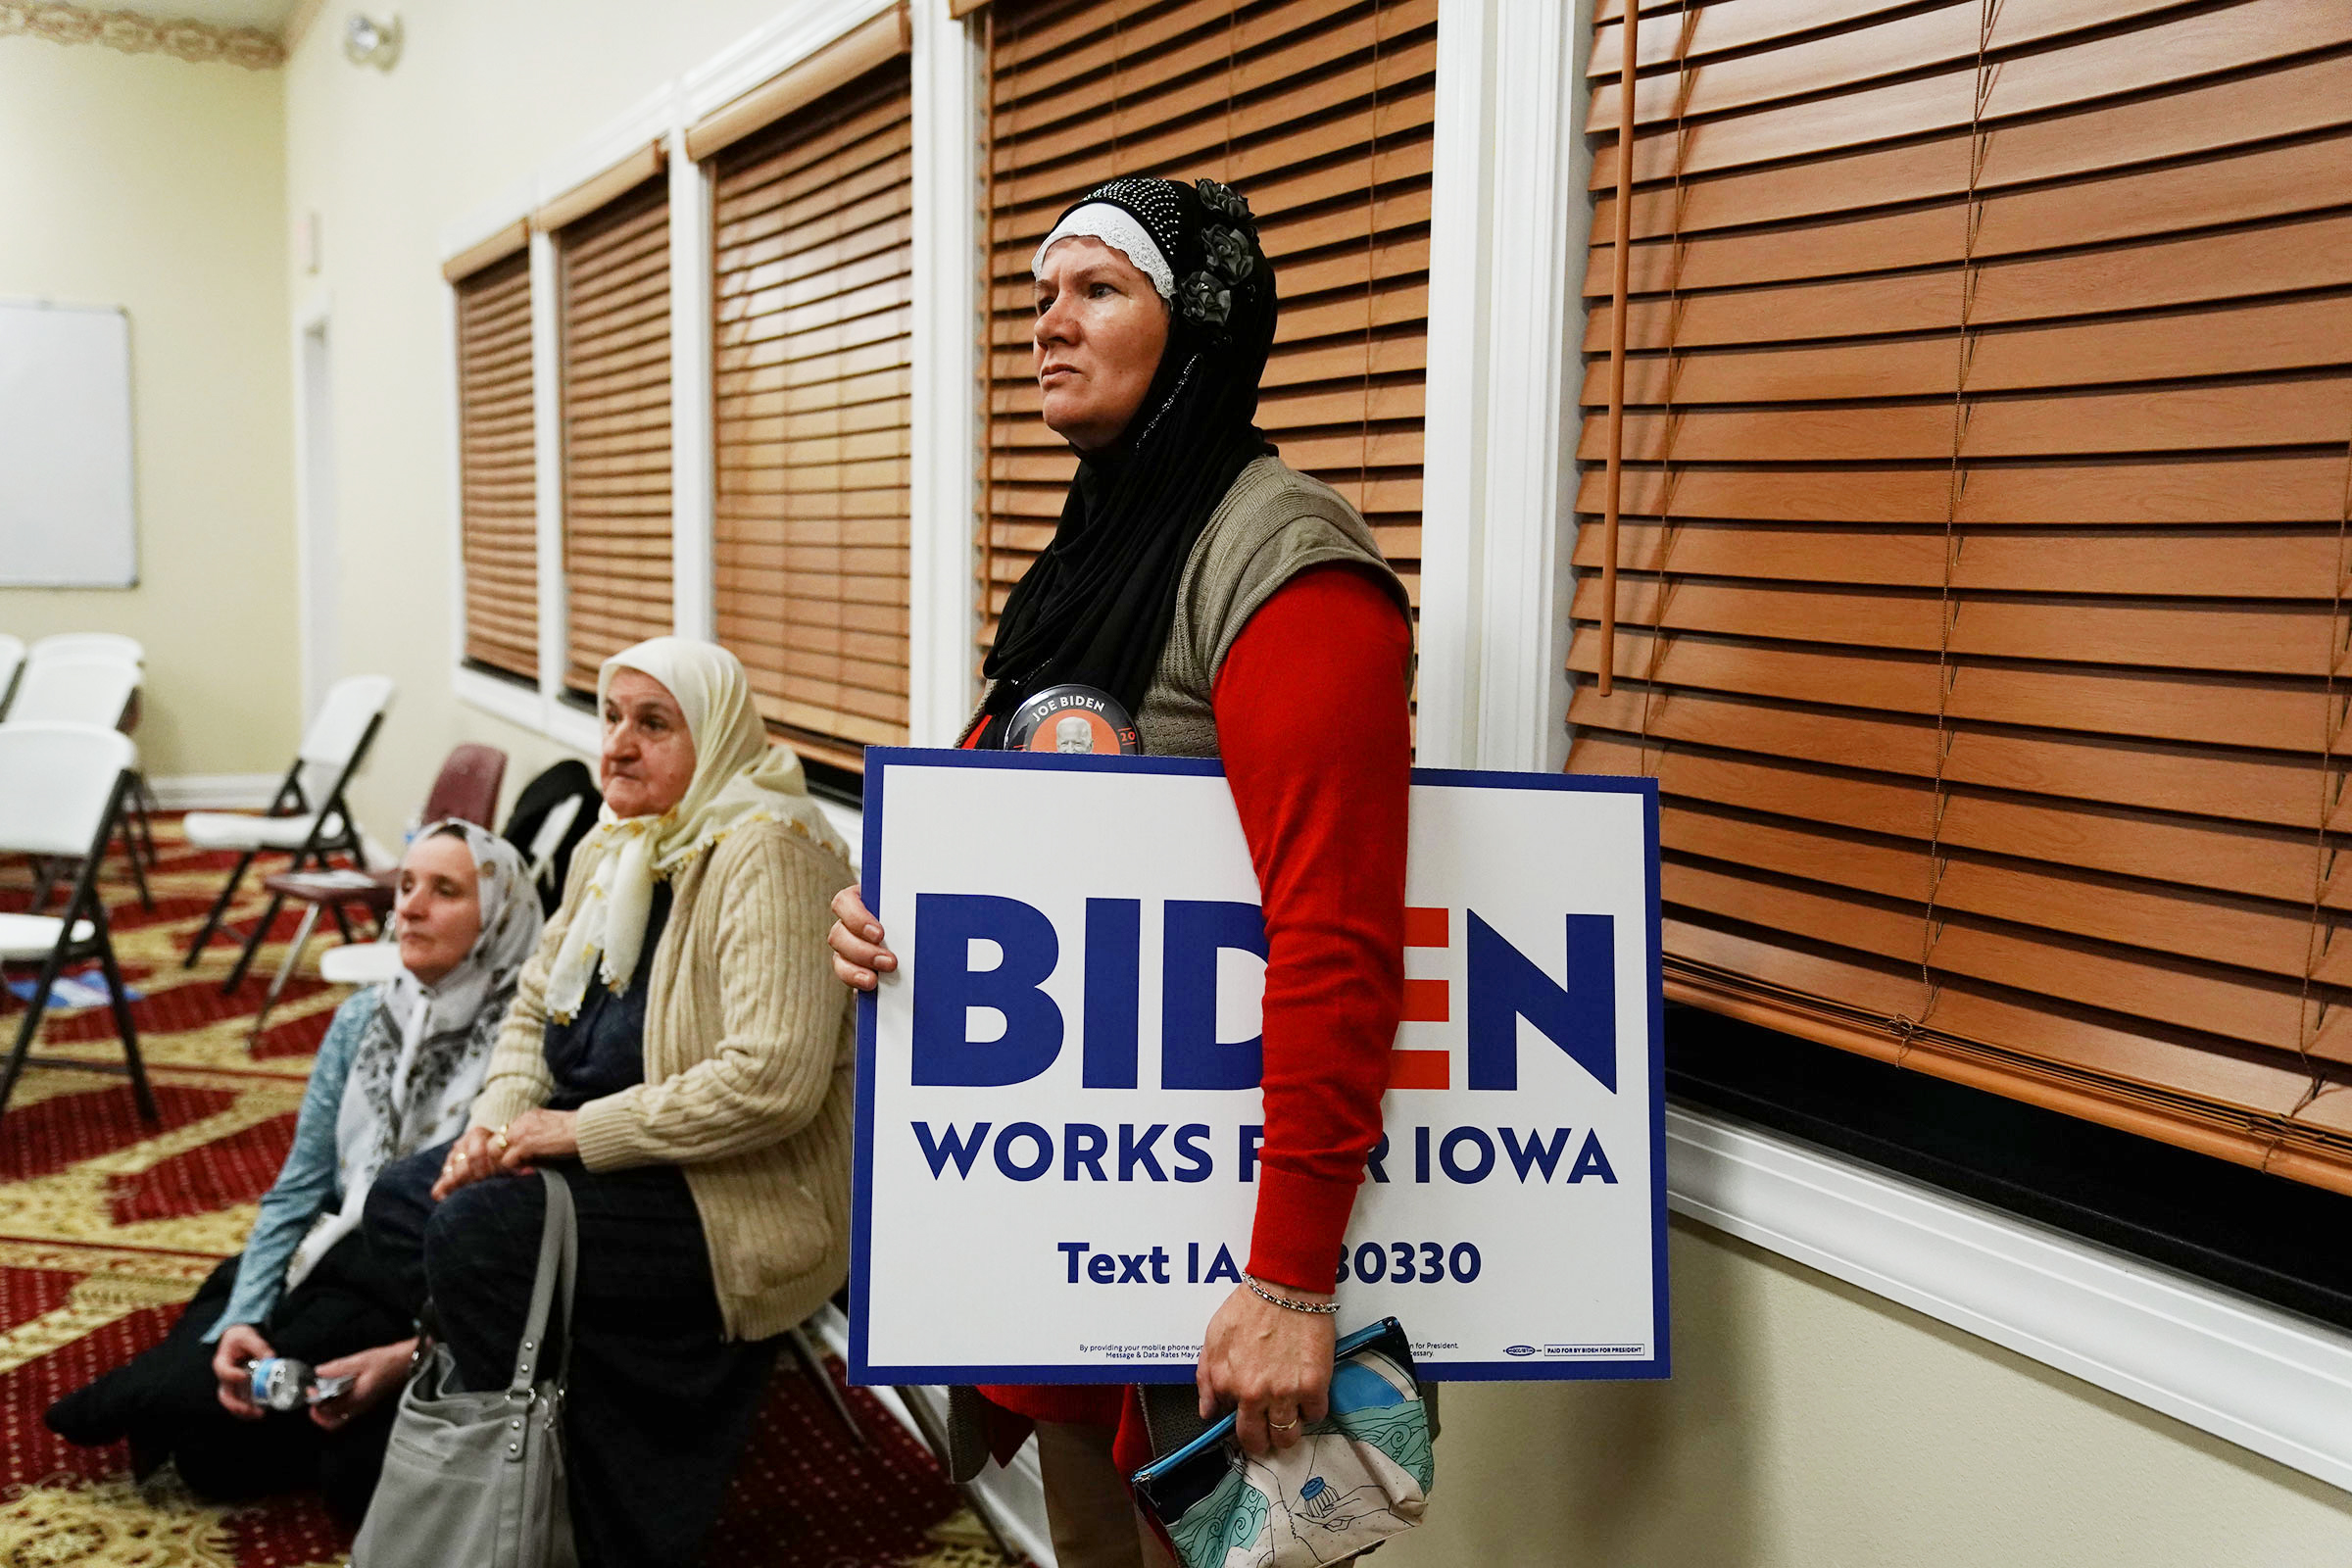 A participant holds a campaign sign for Biden during the first-in-the-nation Iowa caucus in Des Moines.